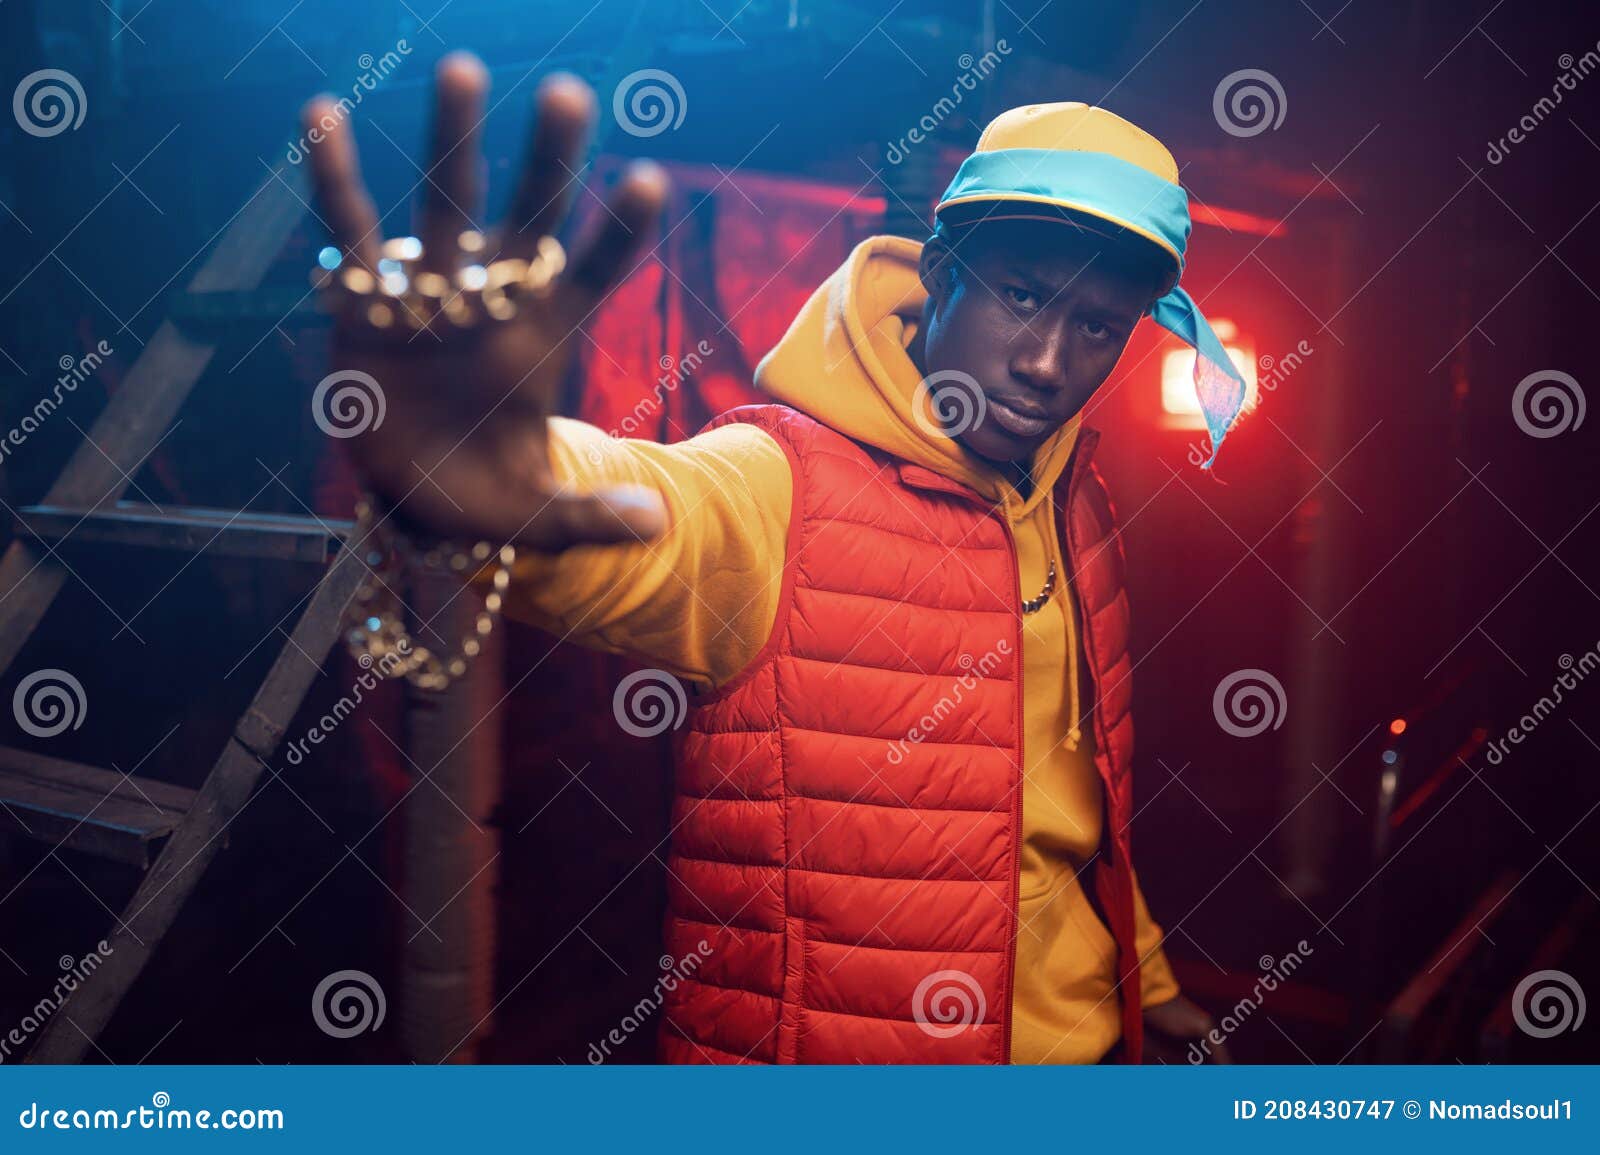 Young Serious Rapper Poses in Grunge Studio Stock Image - Image of ...